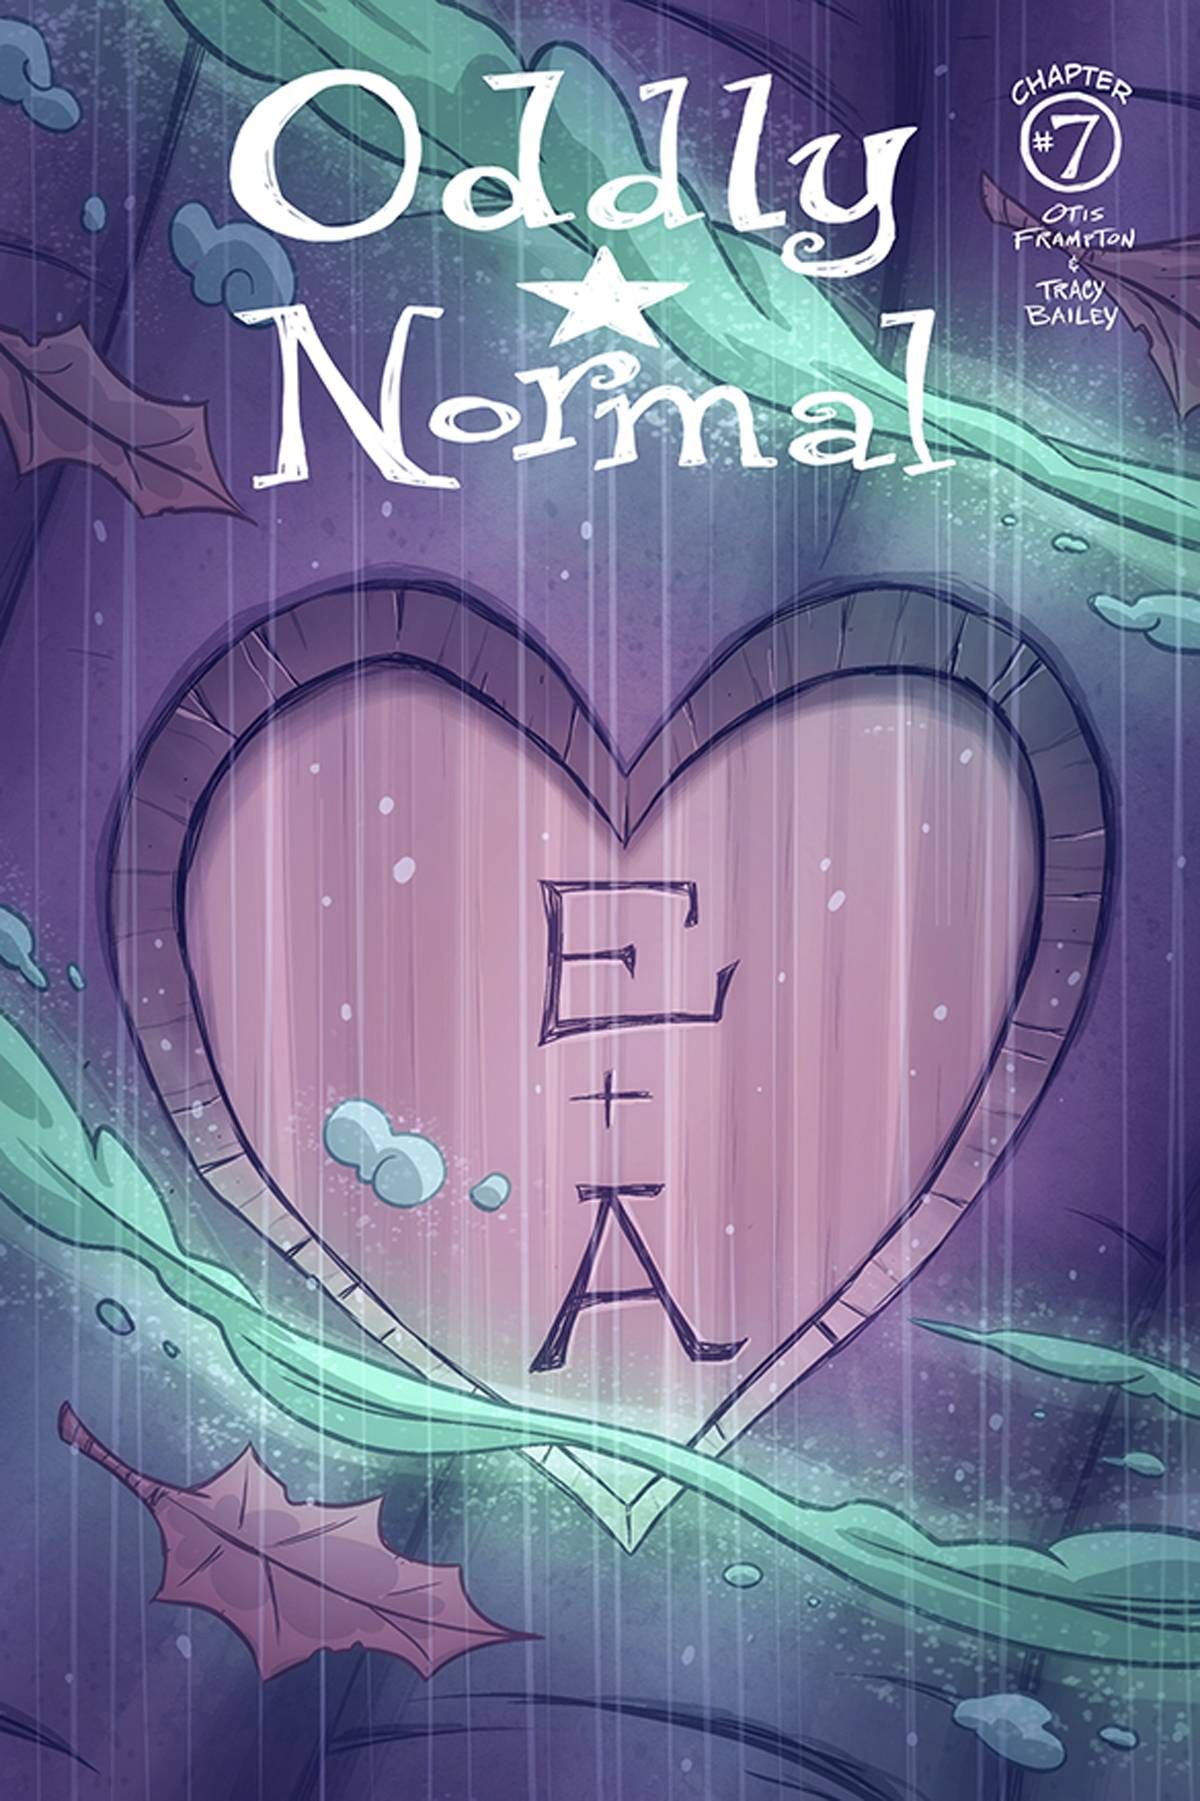 Oddly Normal #7 Comic